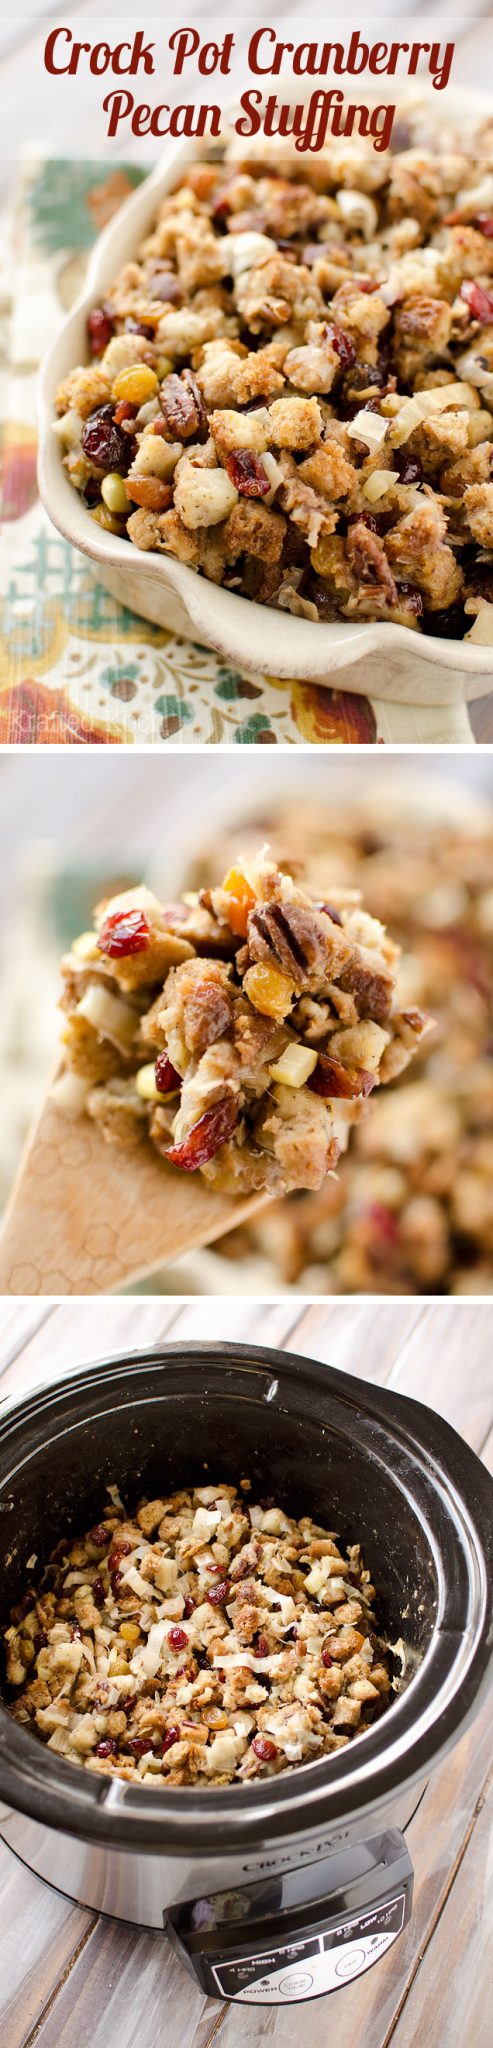 Crock Pot Cranberry Pecan Stuffing - Krafted Koch - A light and easy stuffing recipe made in your slow cooker perfect for a Thanksgiving side dish!